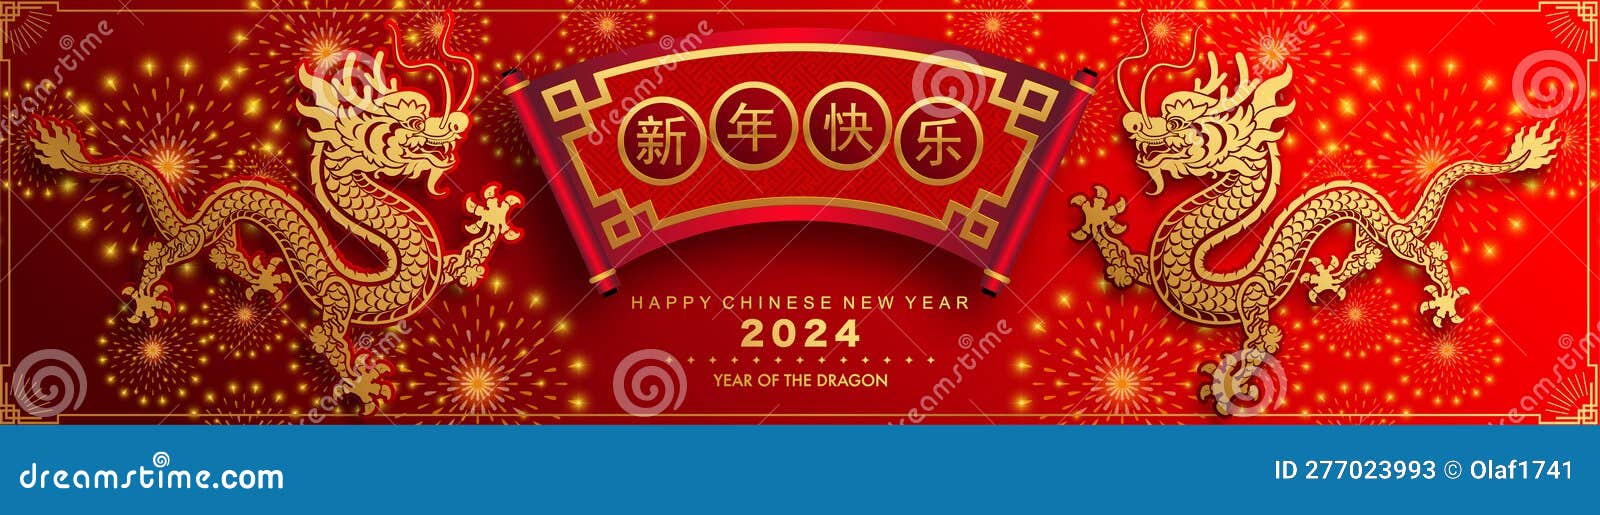 Happy Chinese New Year 2024 the Dragon Zodiac Sign Stock Vector